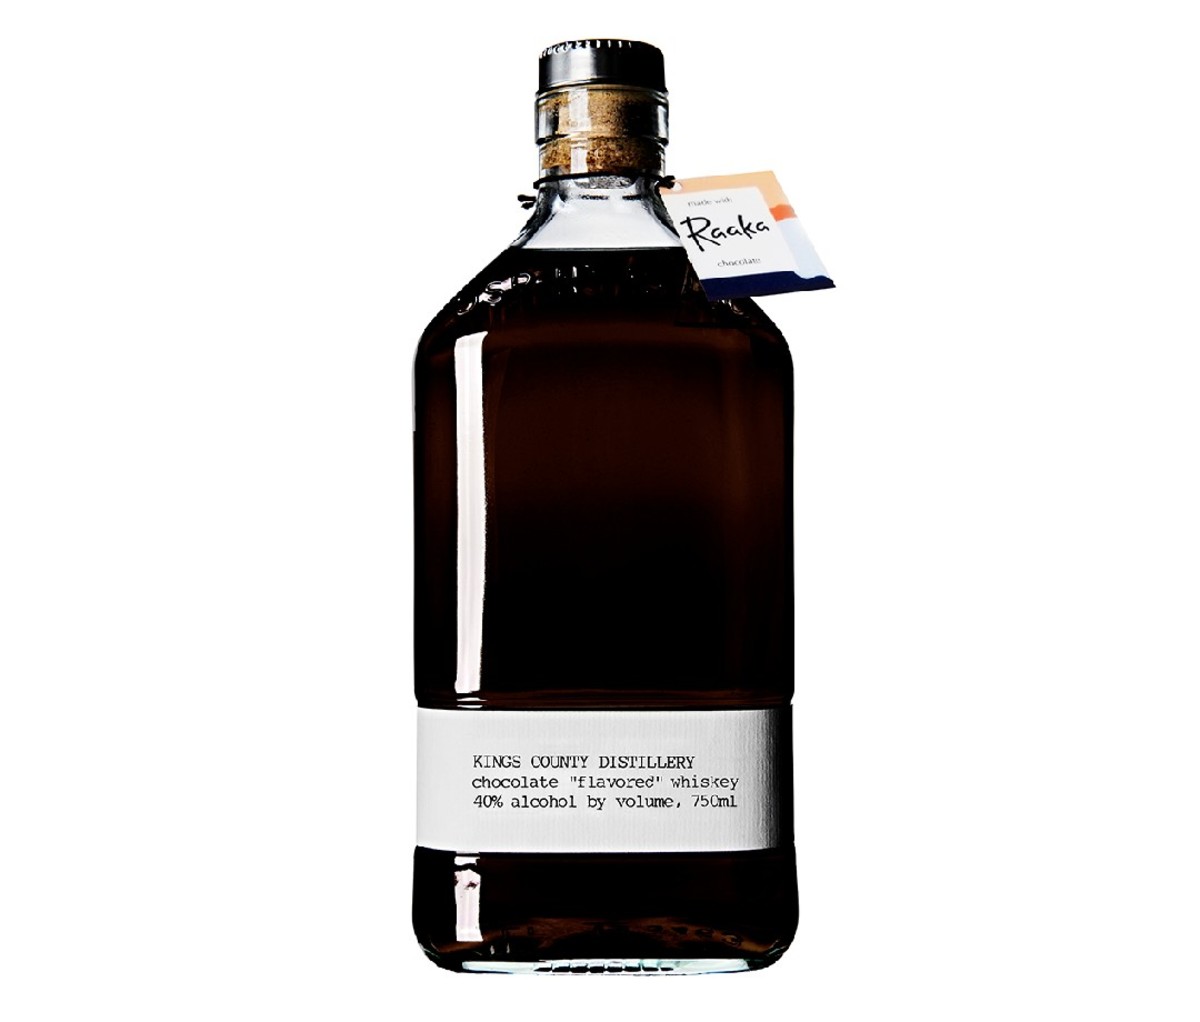 A bottle of Kings County Chocolate Whiskey.